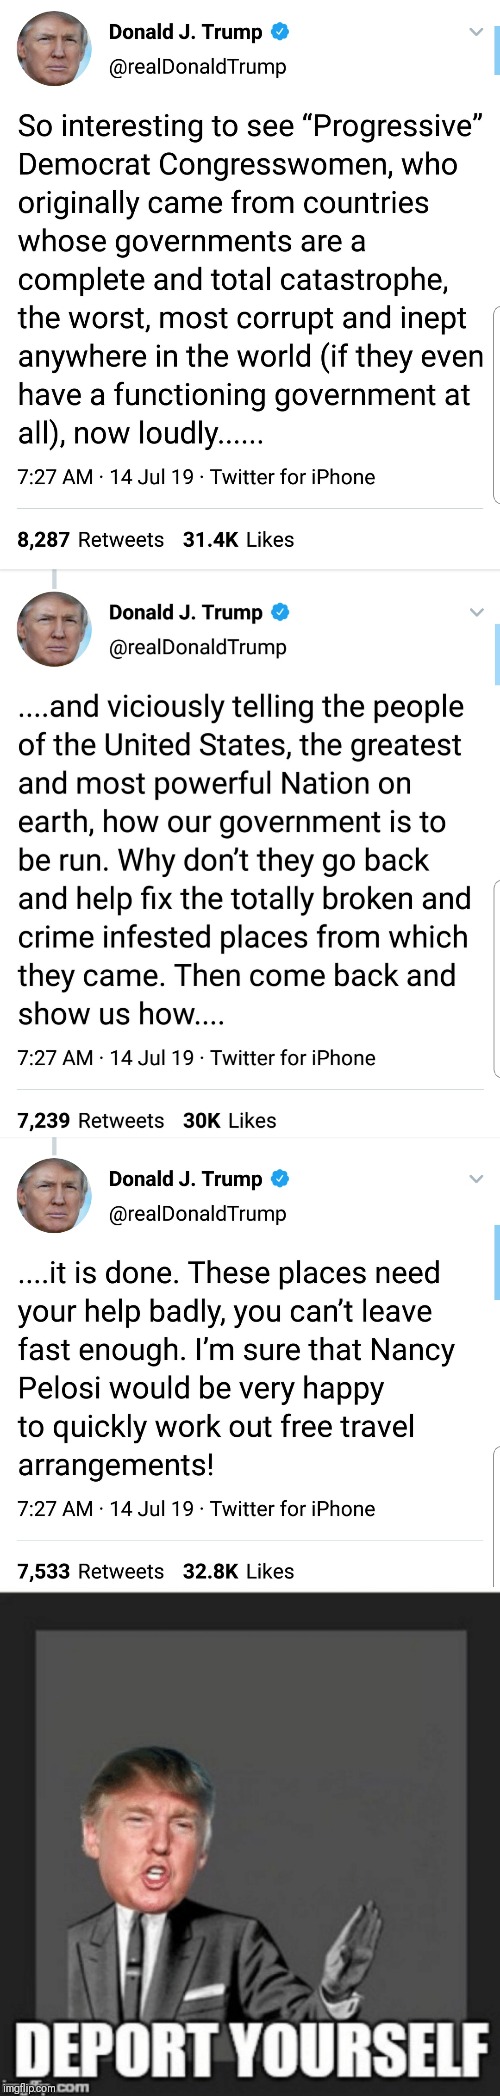 Promptly | image tagged in donald trump,deportation,congress | made w/ Imgflip meme maker